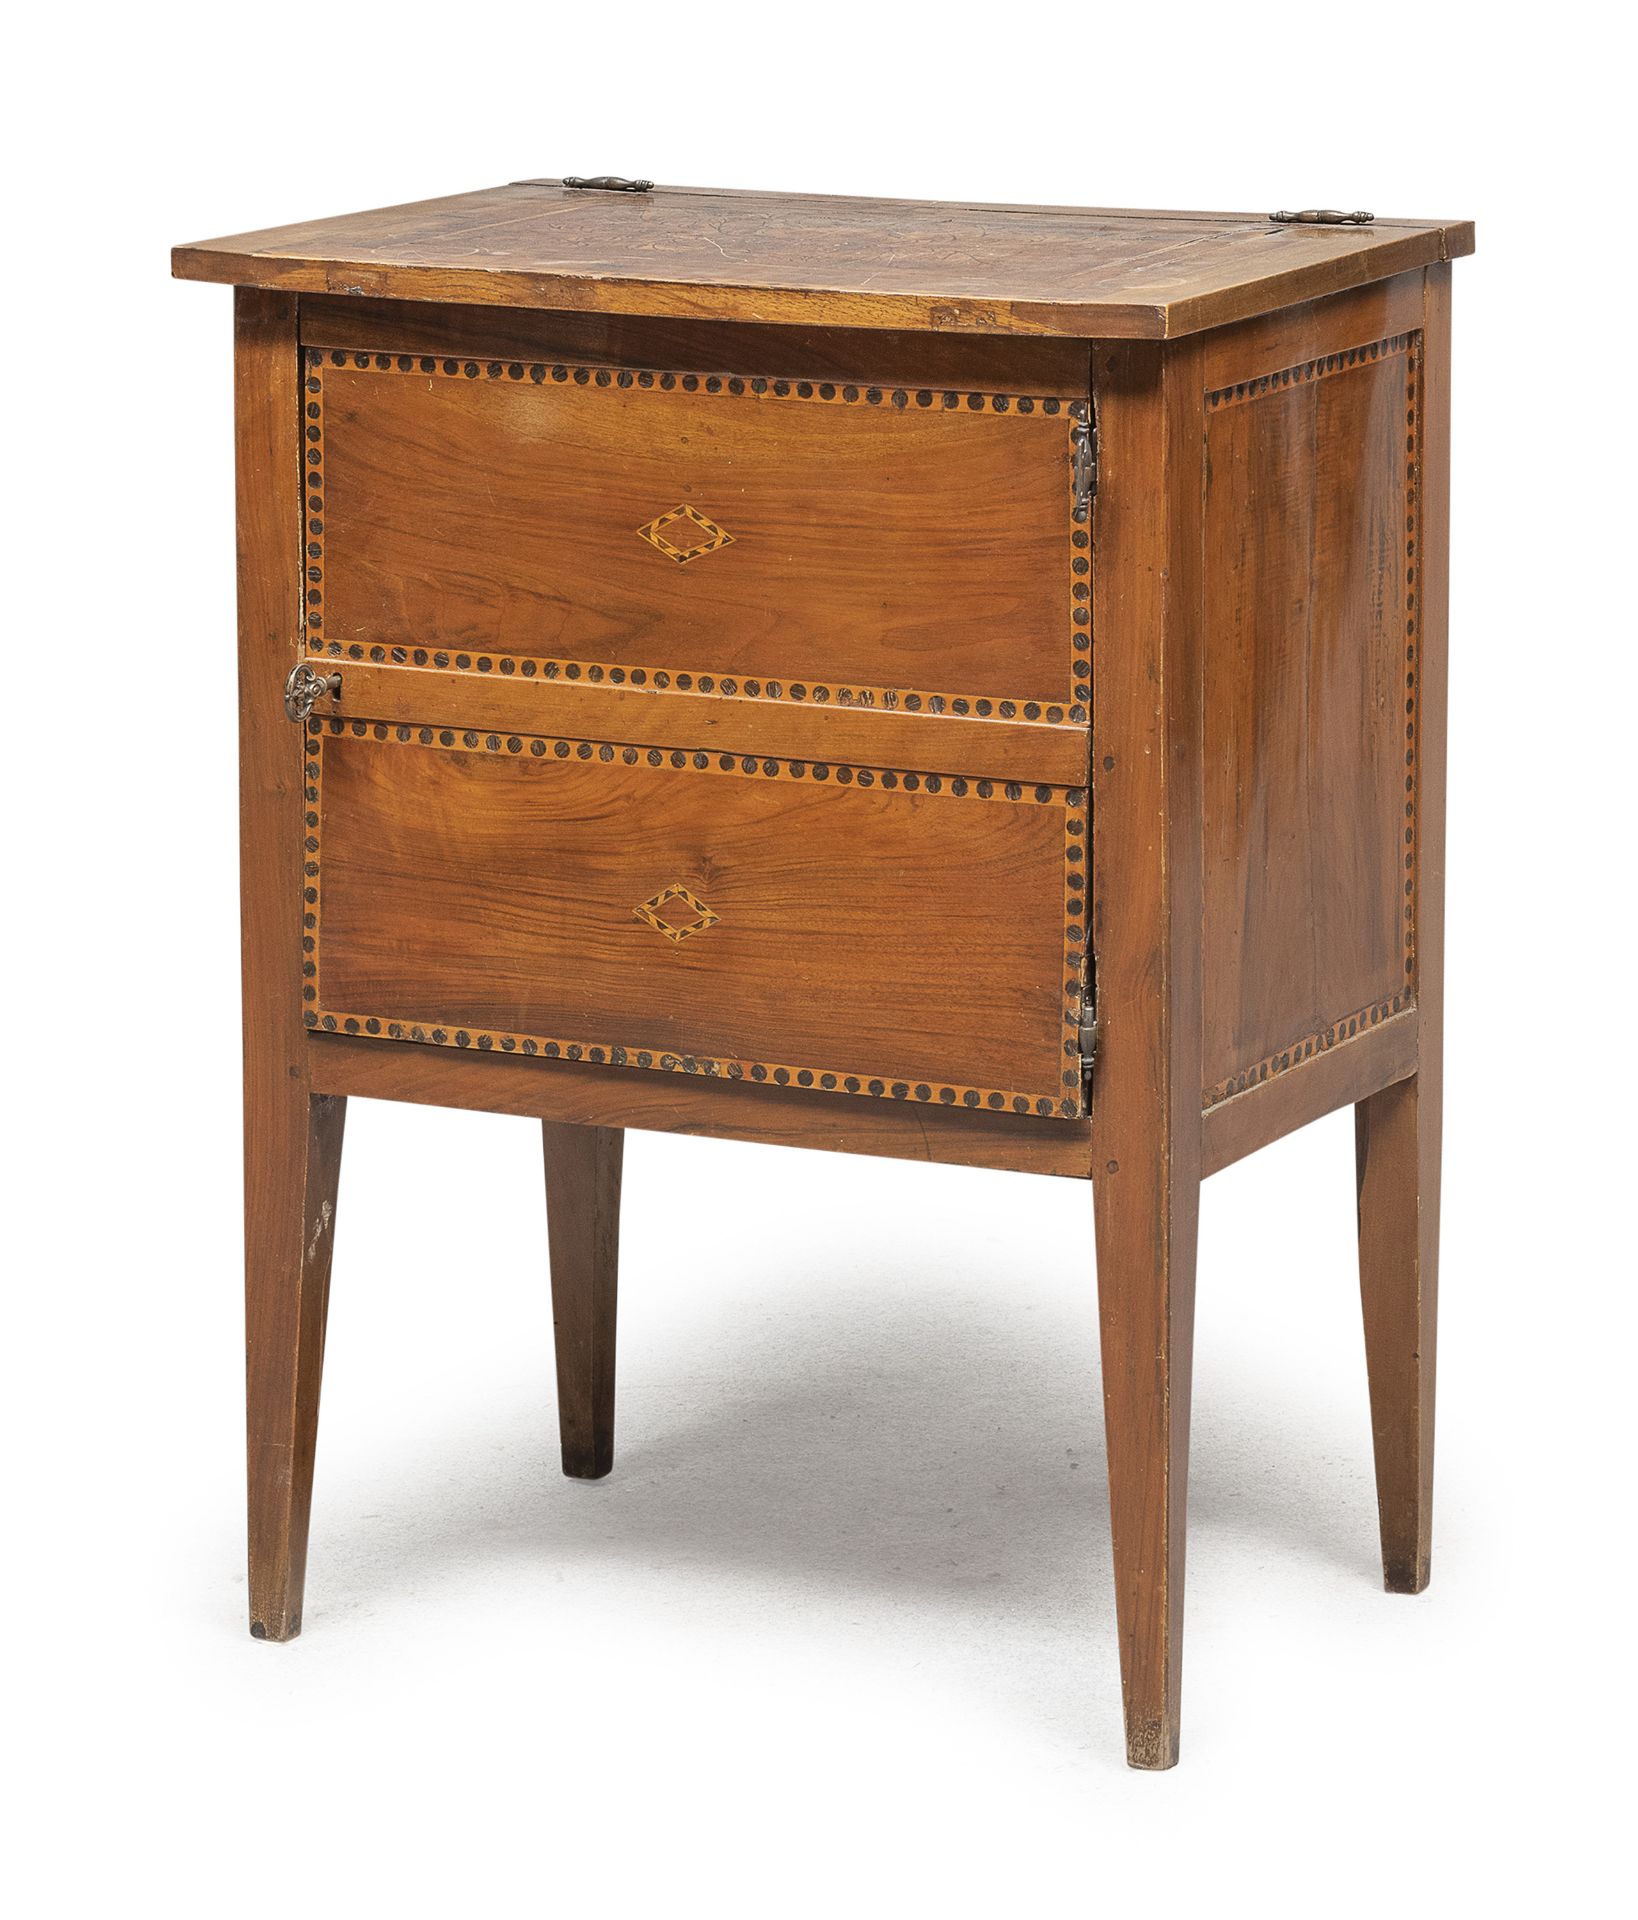 WALNUT BEDSIDE TABLE CENTRAL ITALY EARLY 19TH CENTURY